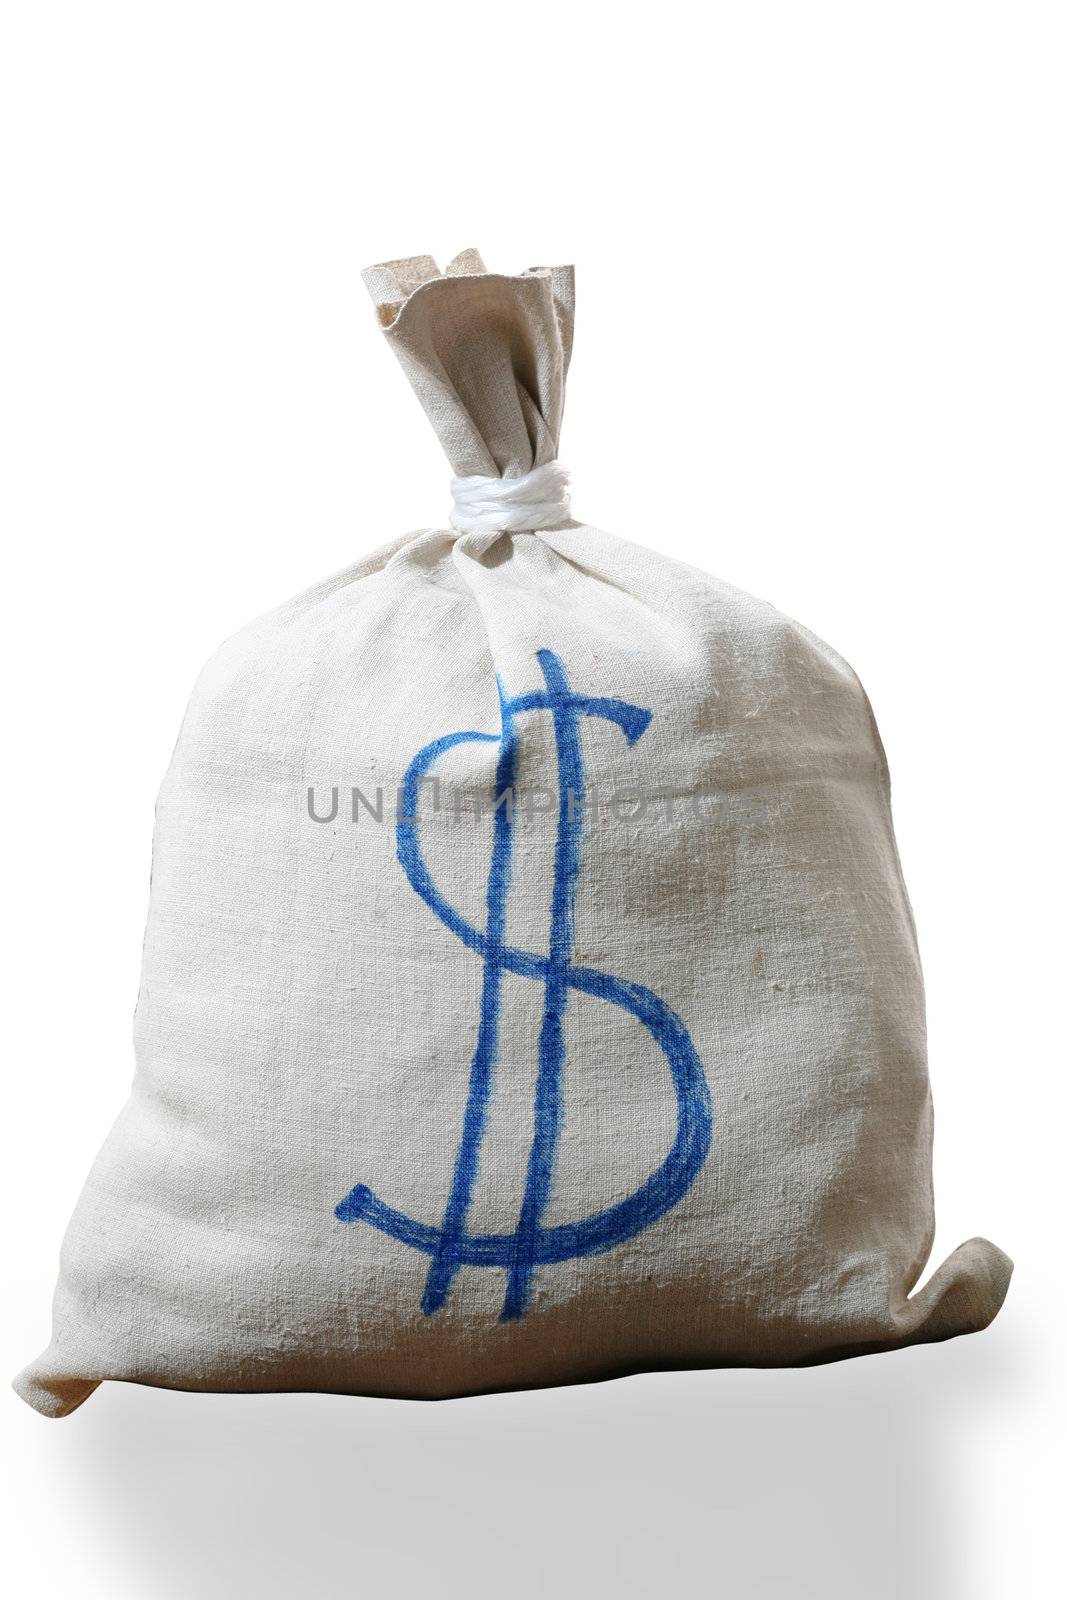 An image of a white bag with sign dollar on it
